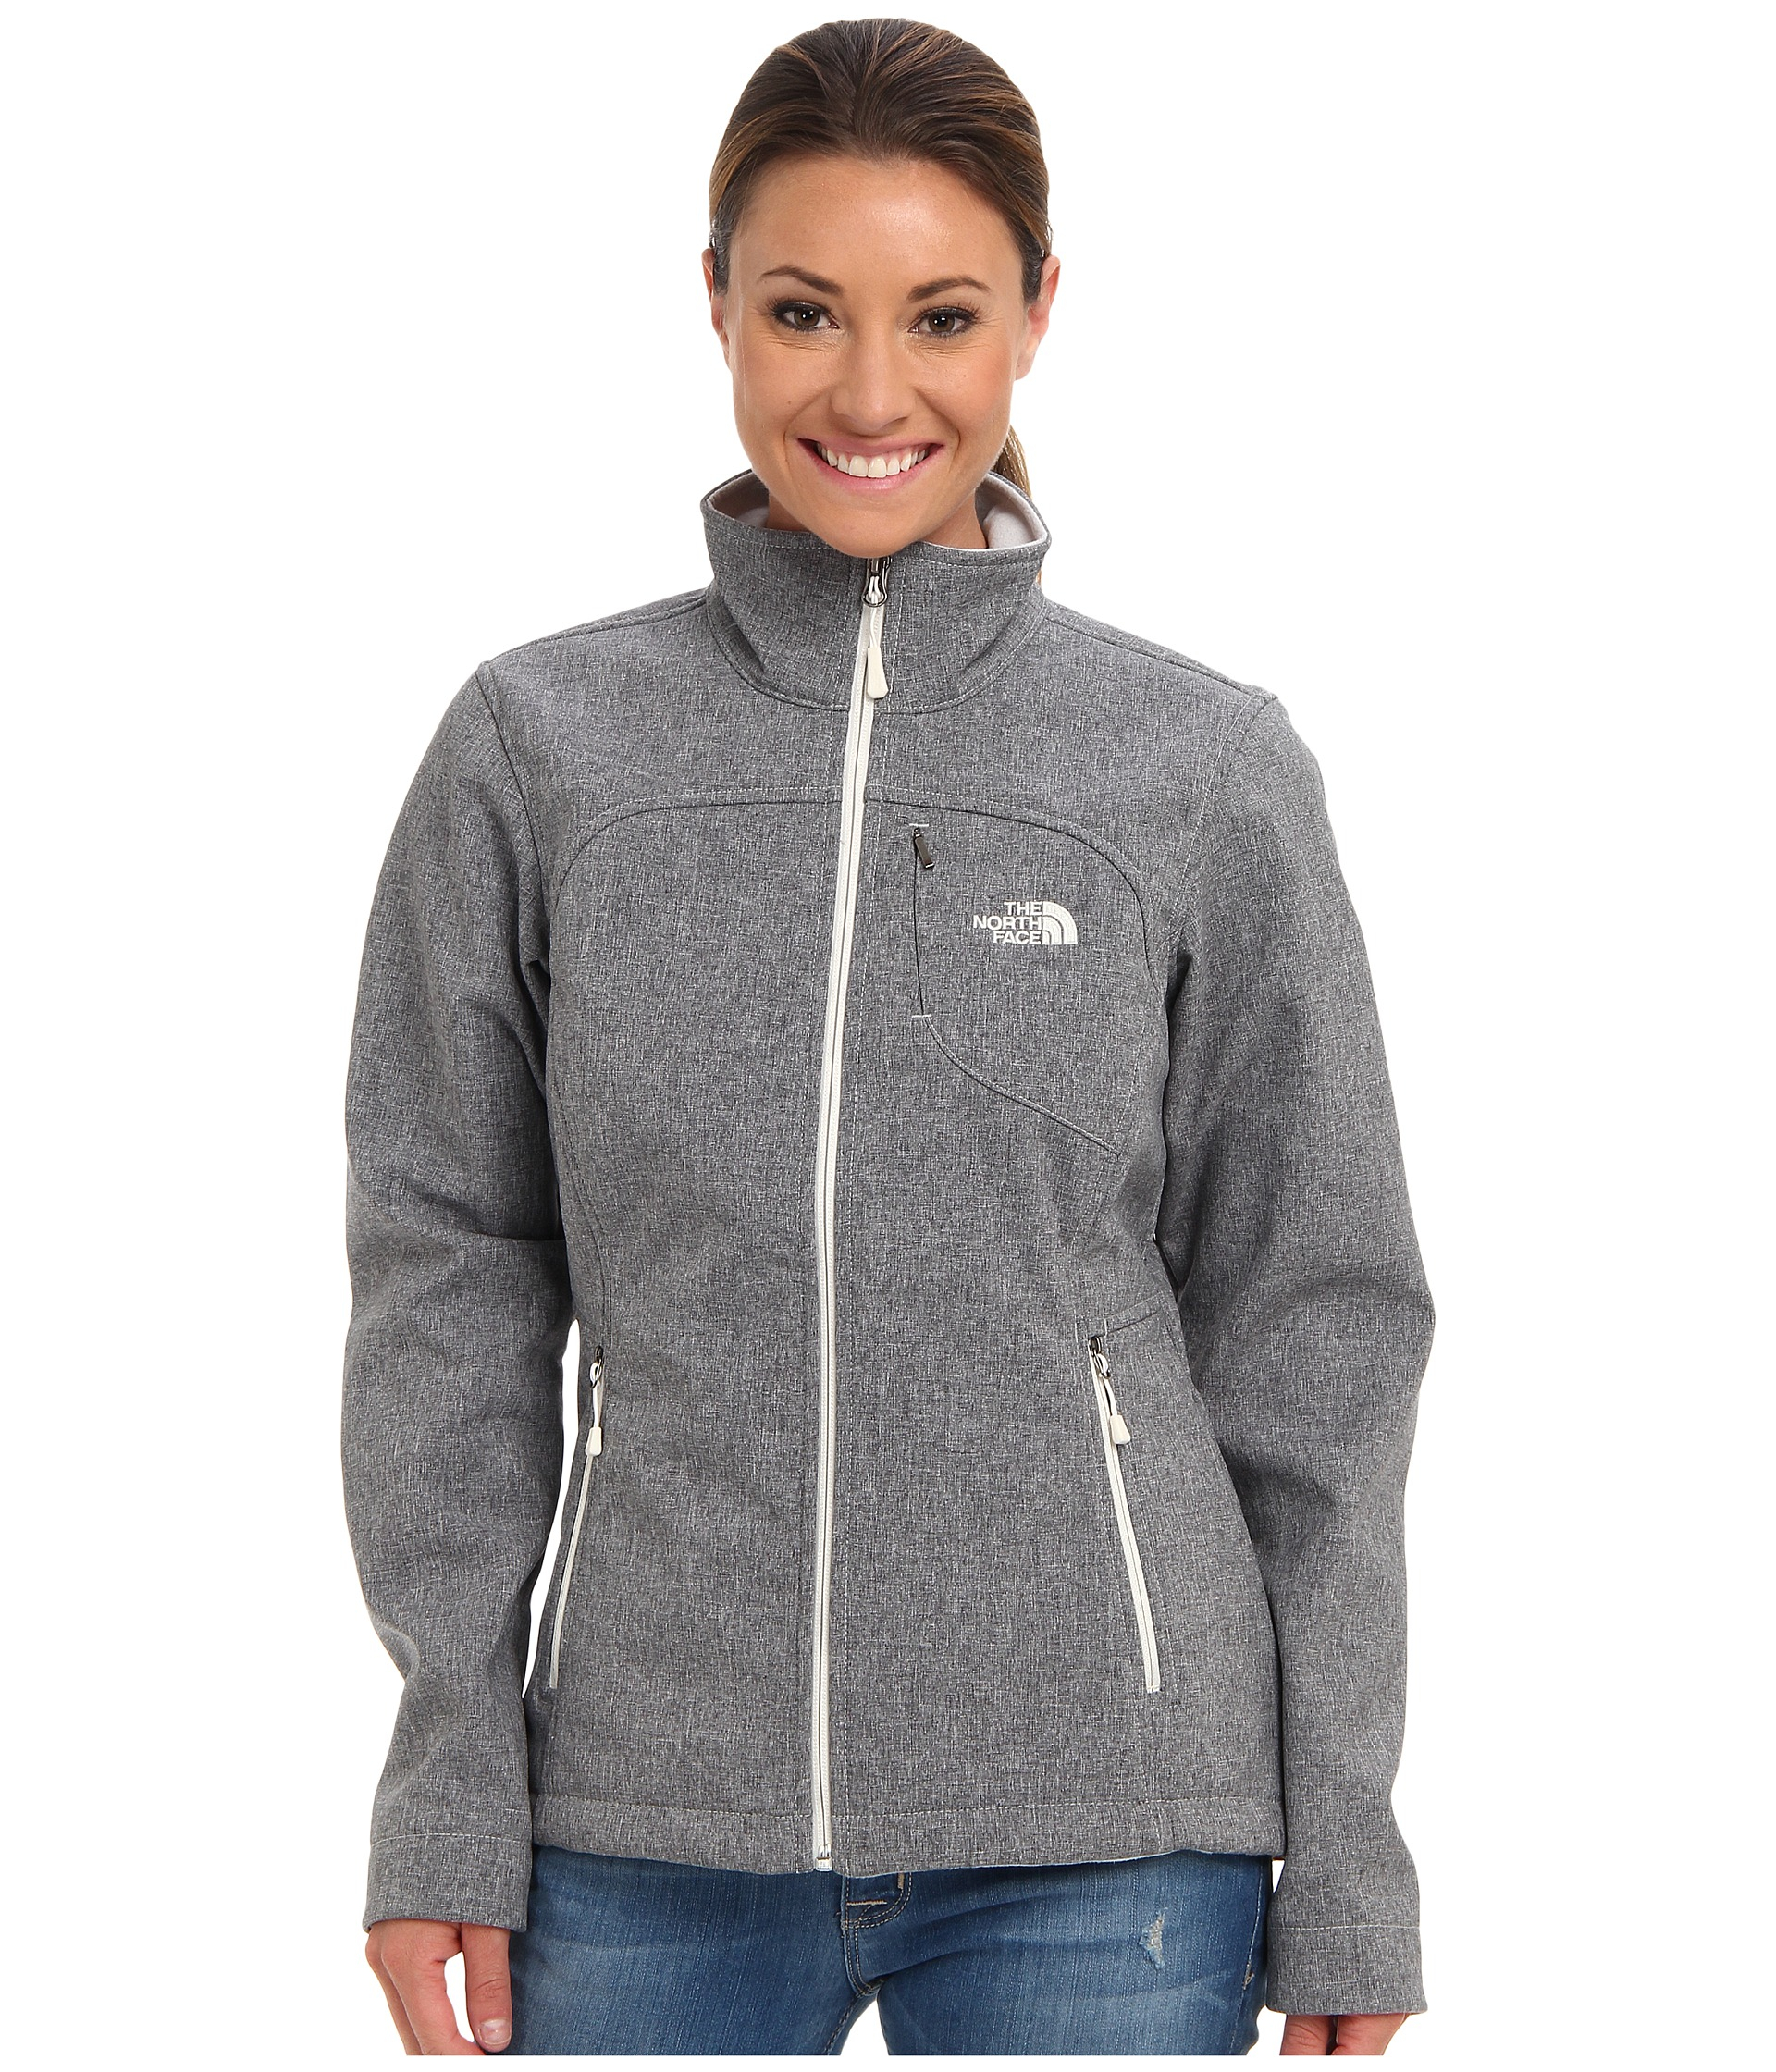 Lyst - The north face Apex Bionic Jacket in Gray